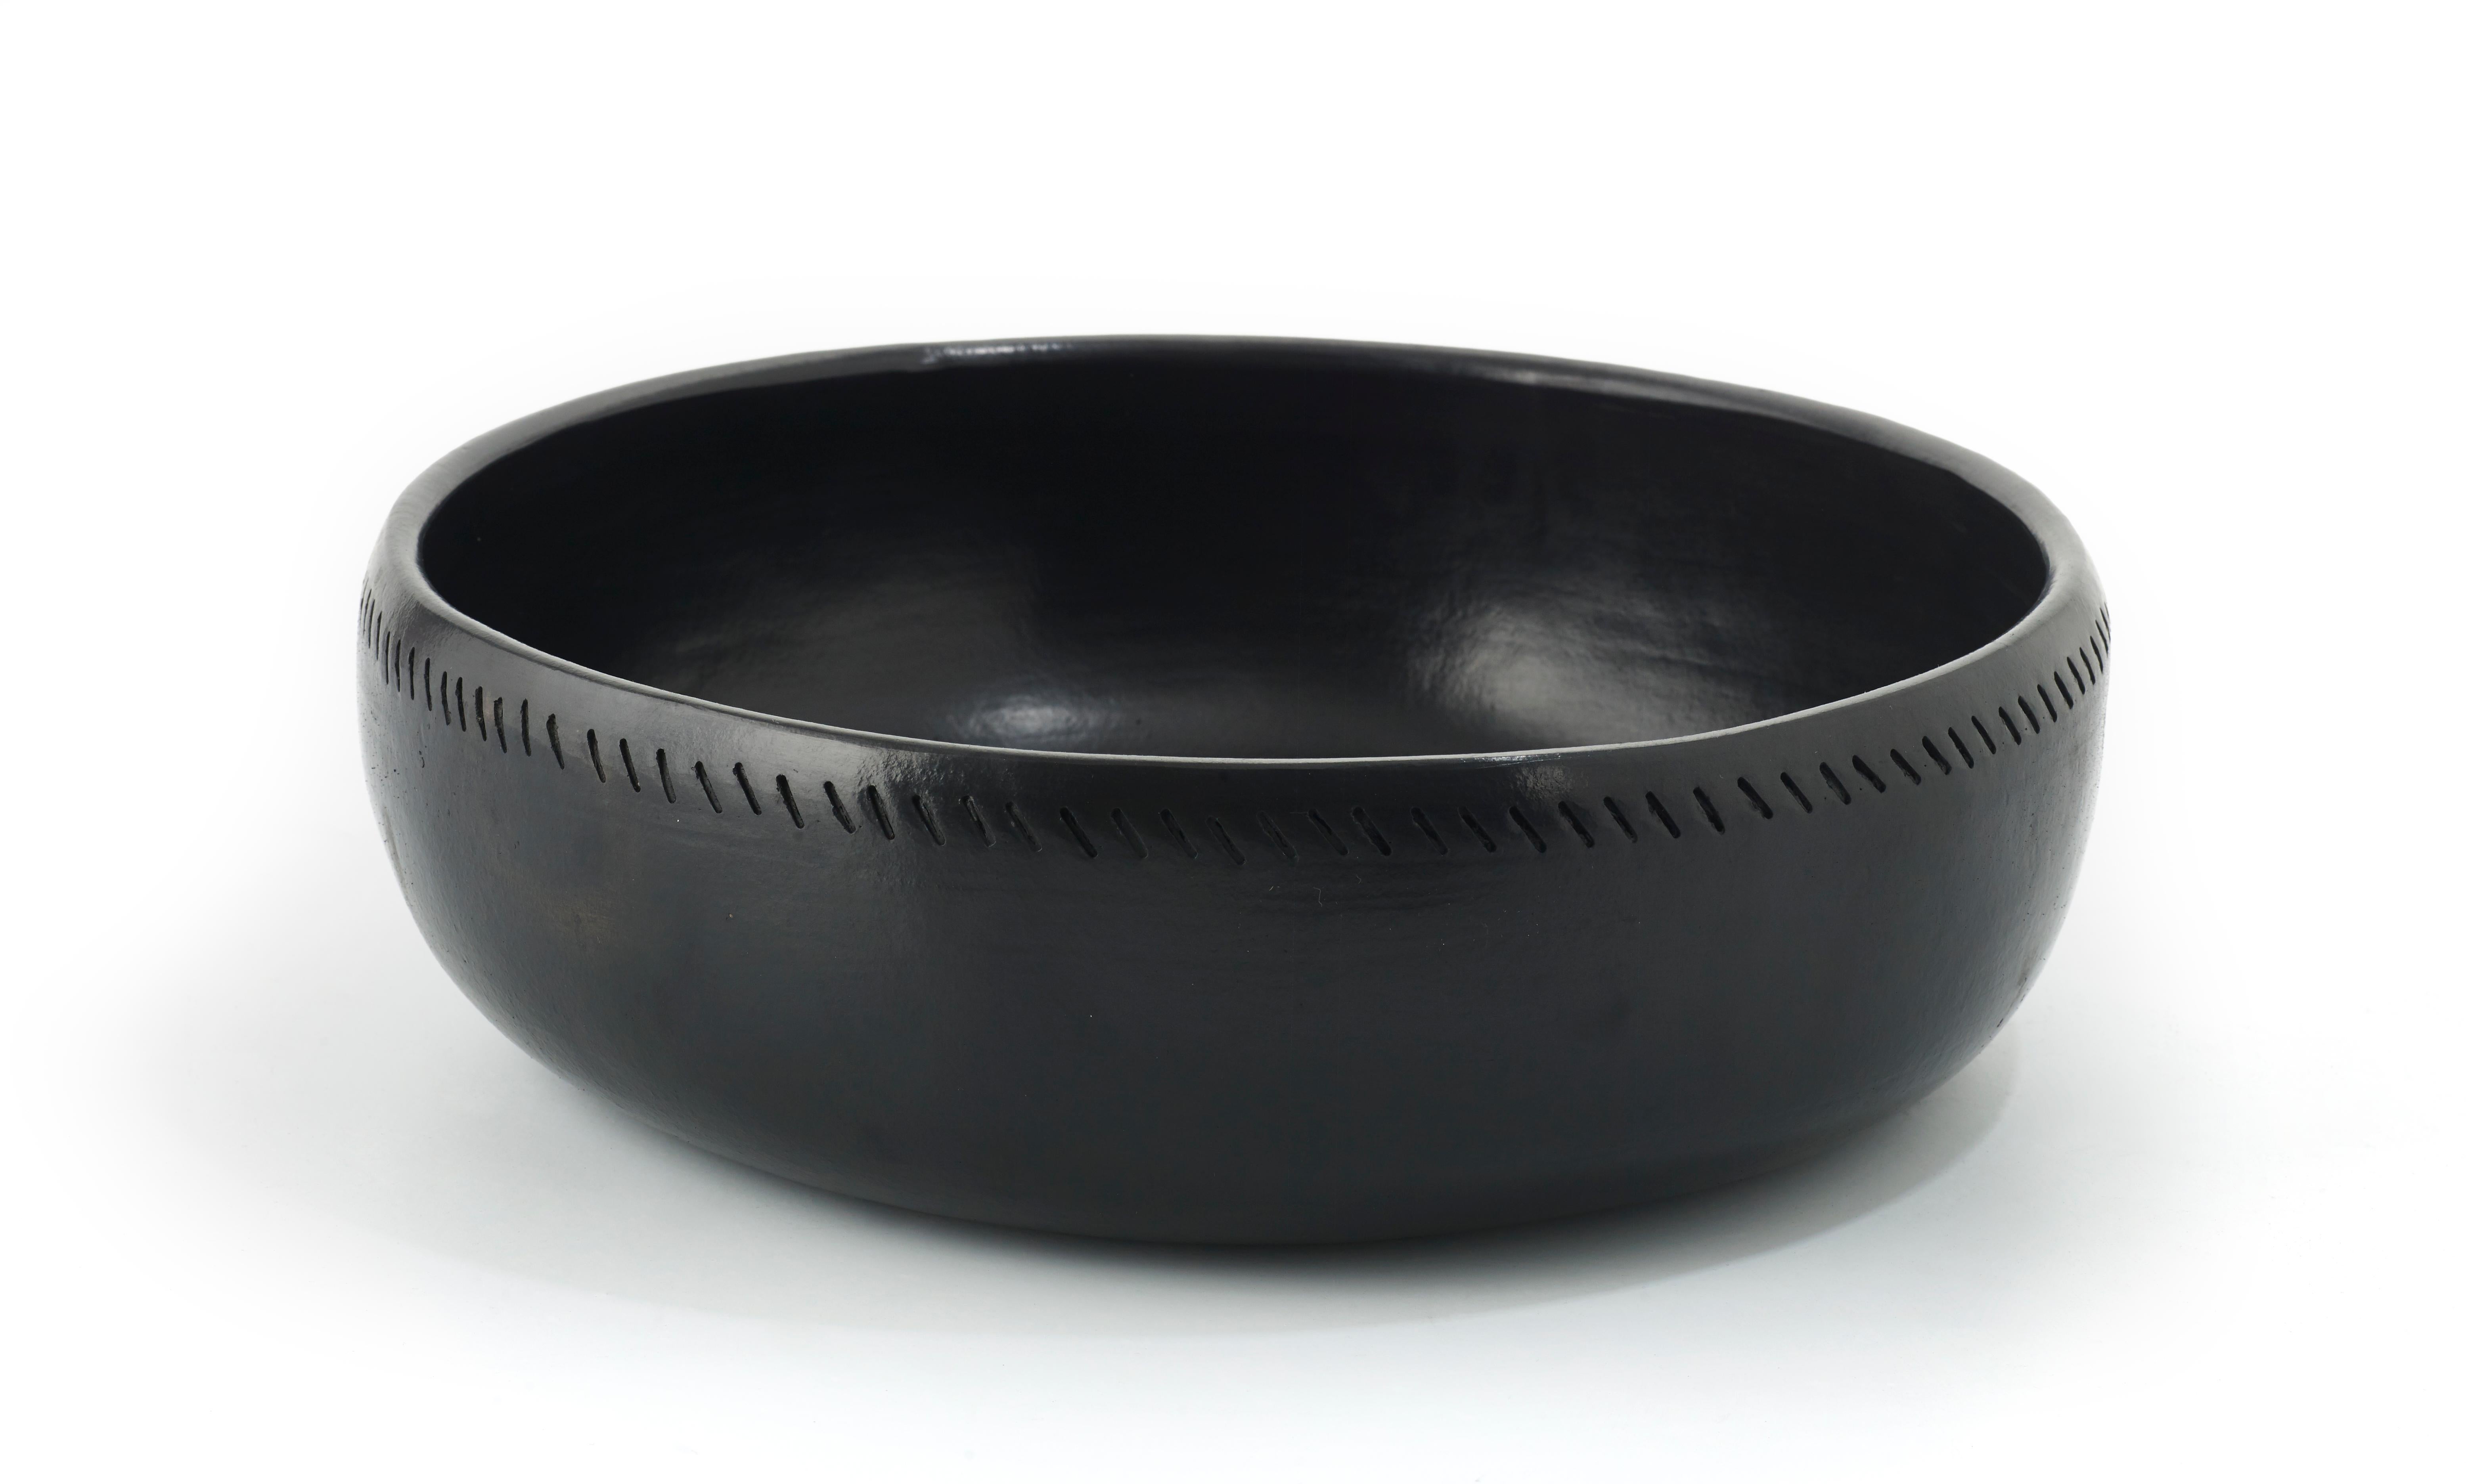 Large bowl barro dining by Sebastian Herkner
Materials: Heat-resistant black ceramic. 
Technique: Glazed. Oven cooked and polished with semi-precious stones. 
Dimensions: Diameter 38 cm x height 12 cm 
Available in sizes: Medium, small, and X small.